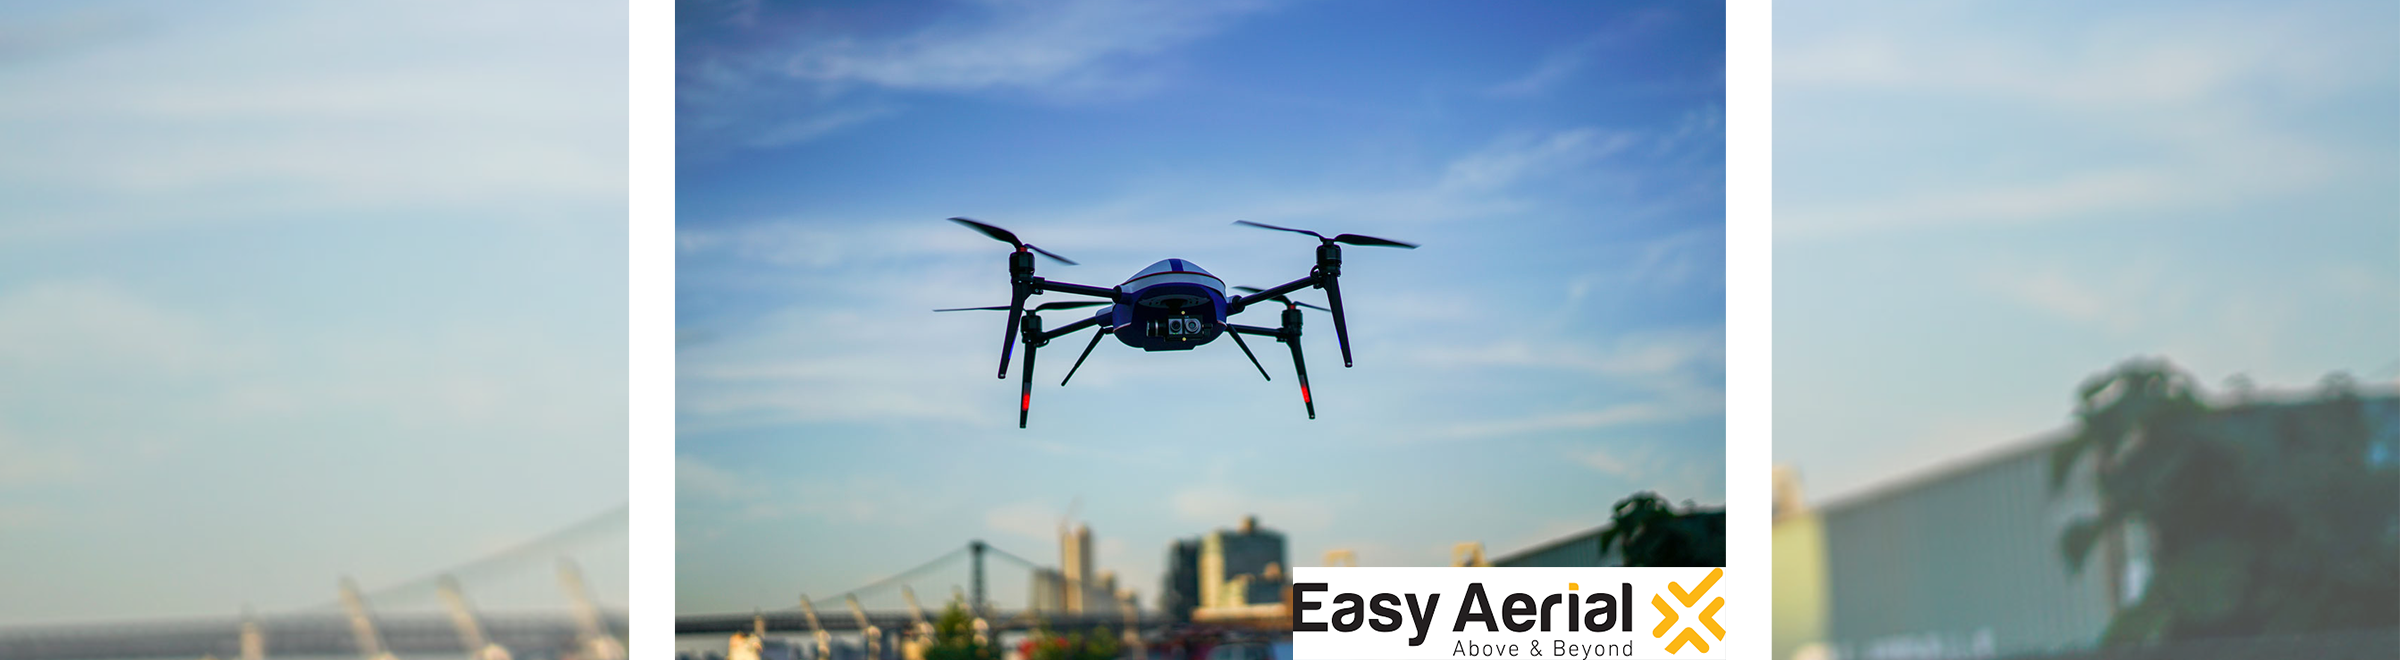 Kitron partners with Easy Aerial to create intelligent drone solutions